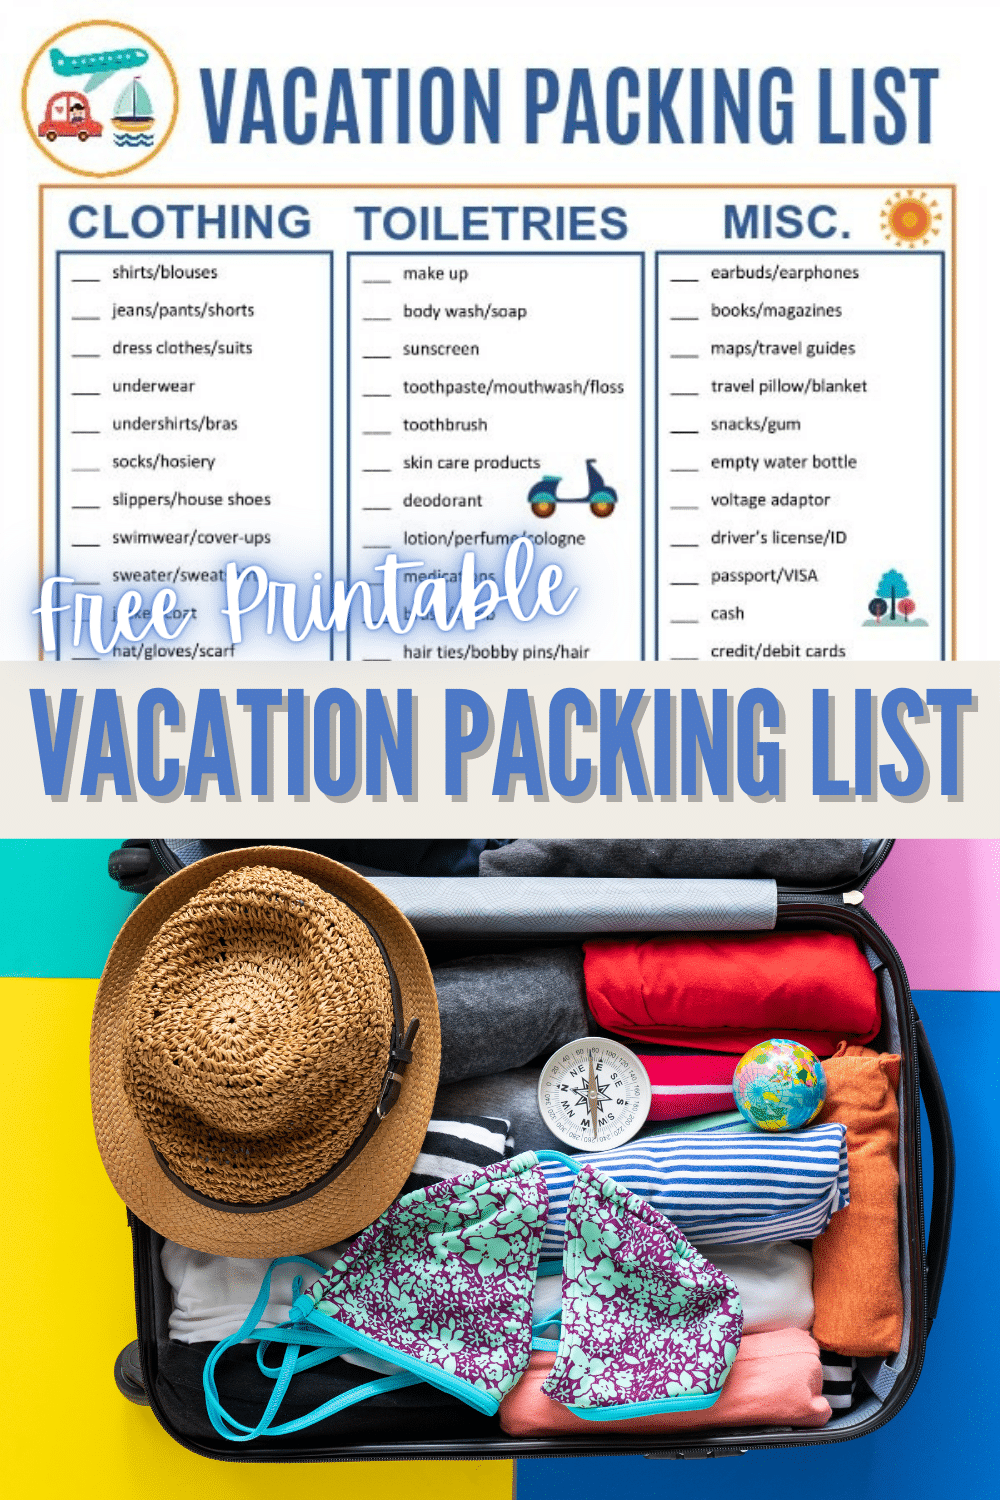 This printable Vacation Packing List will help keep you organized so you can relax while you travel. You won't forget anything important with this list. #printable #travel #packinglist via @wondermomwannab